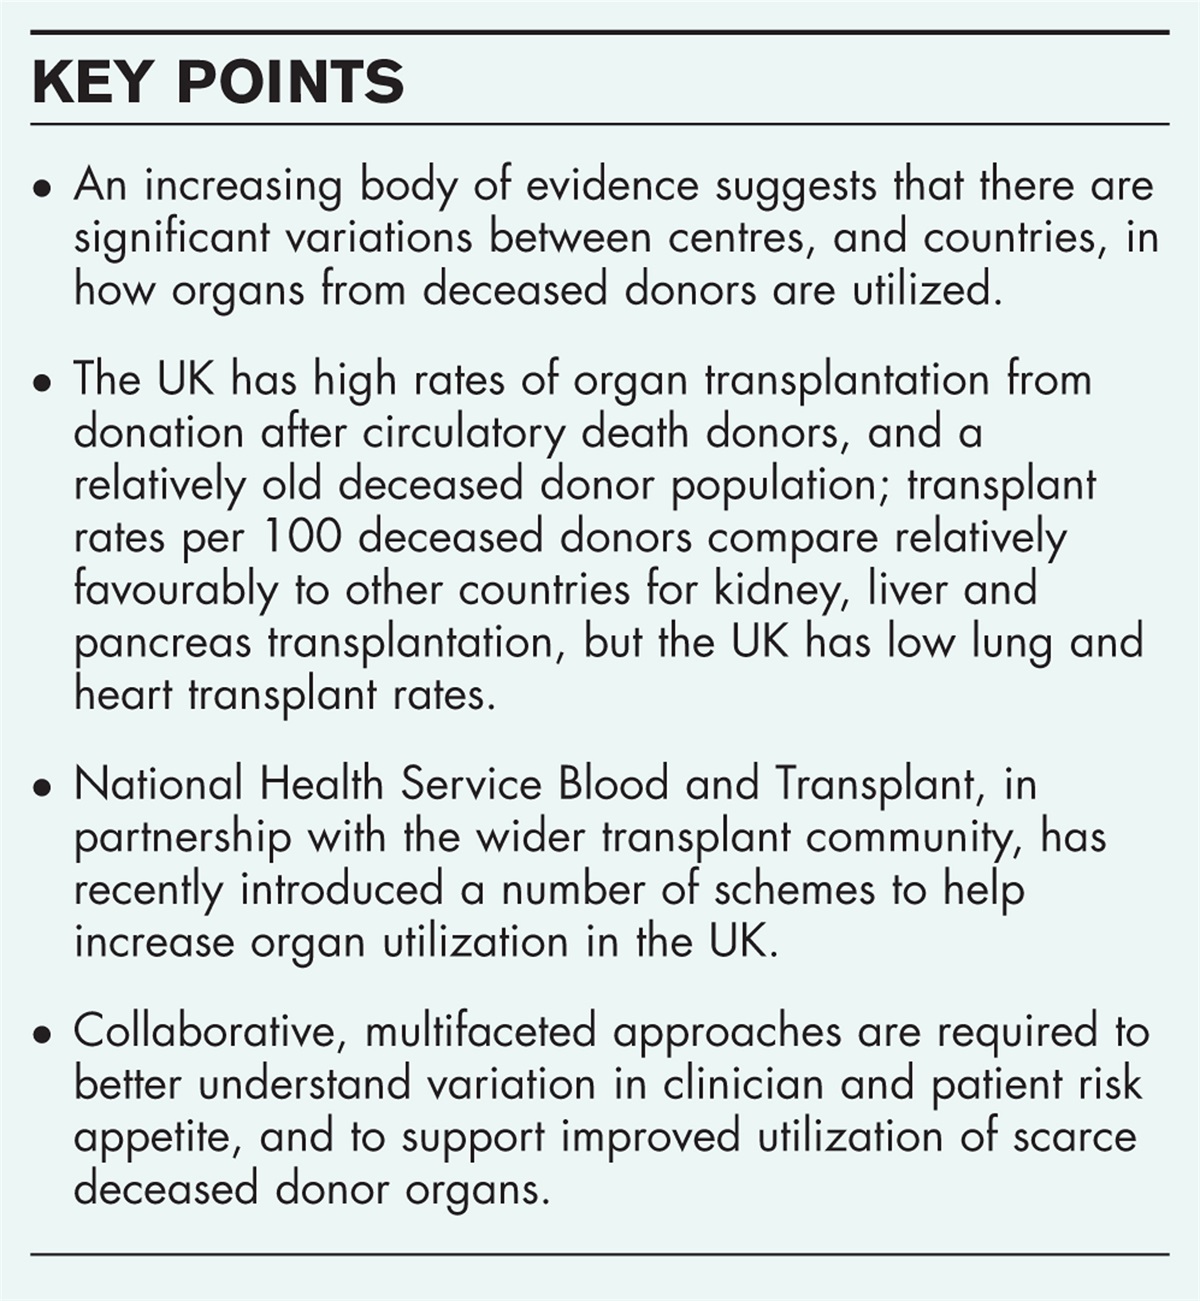 Beyond donation to organ utilization in the UK